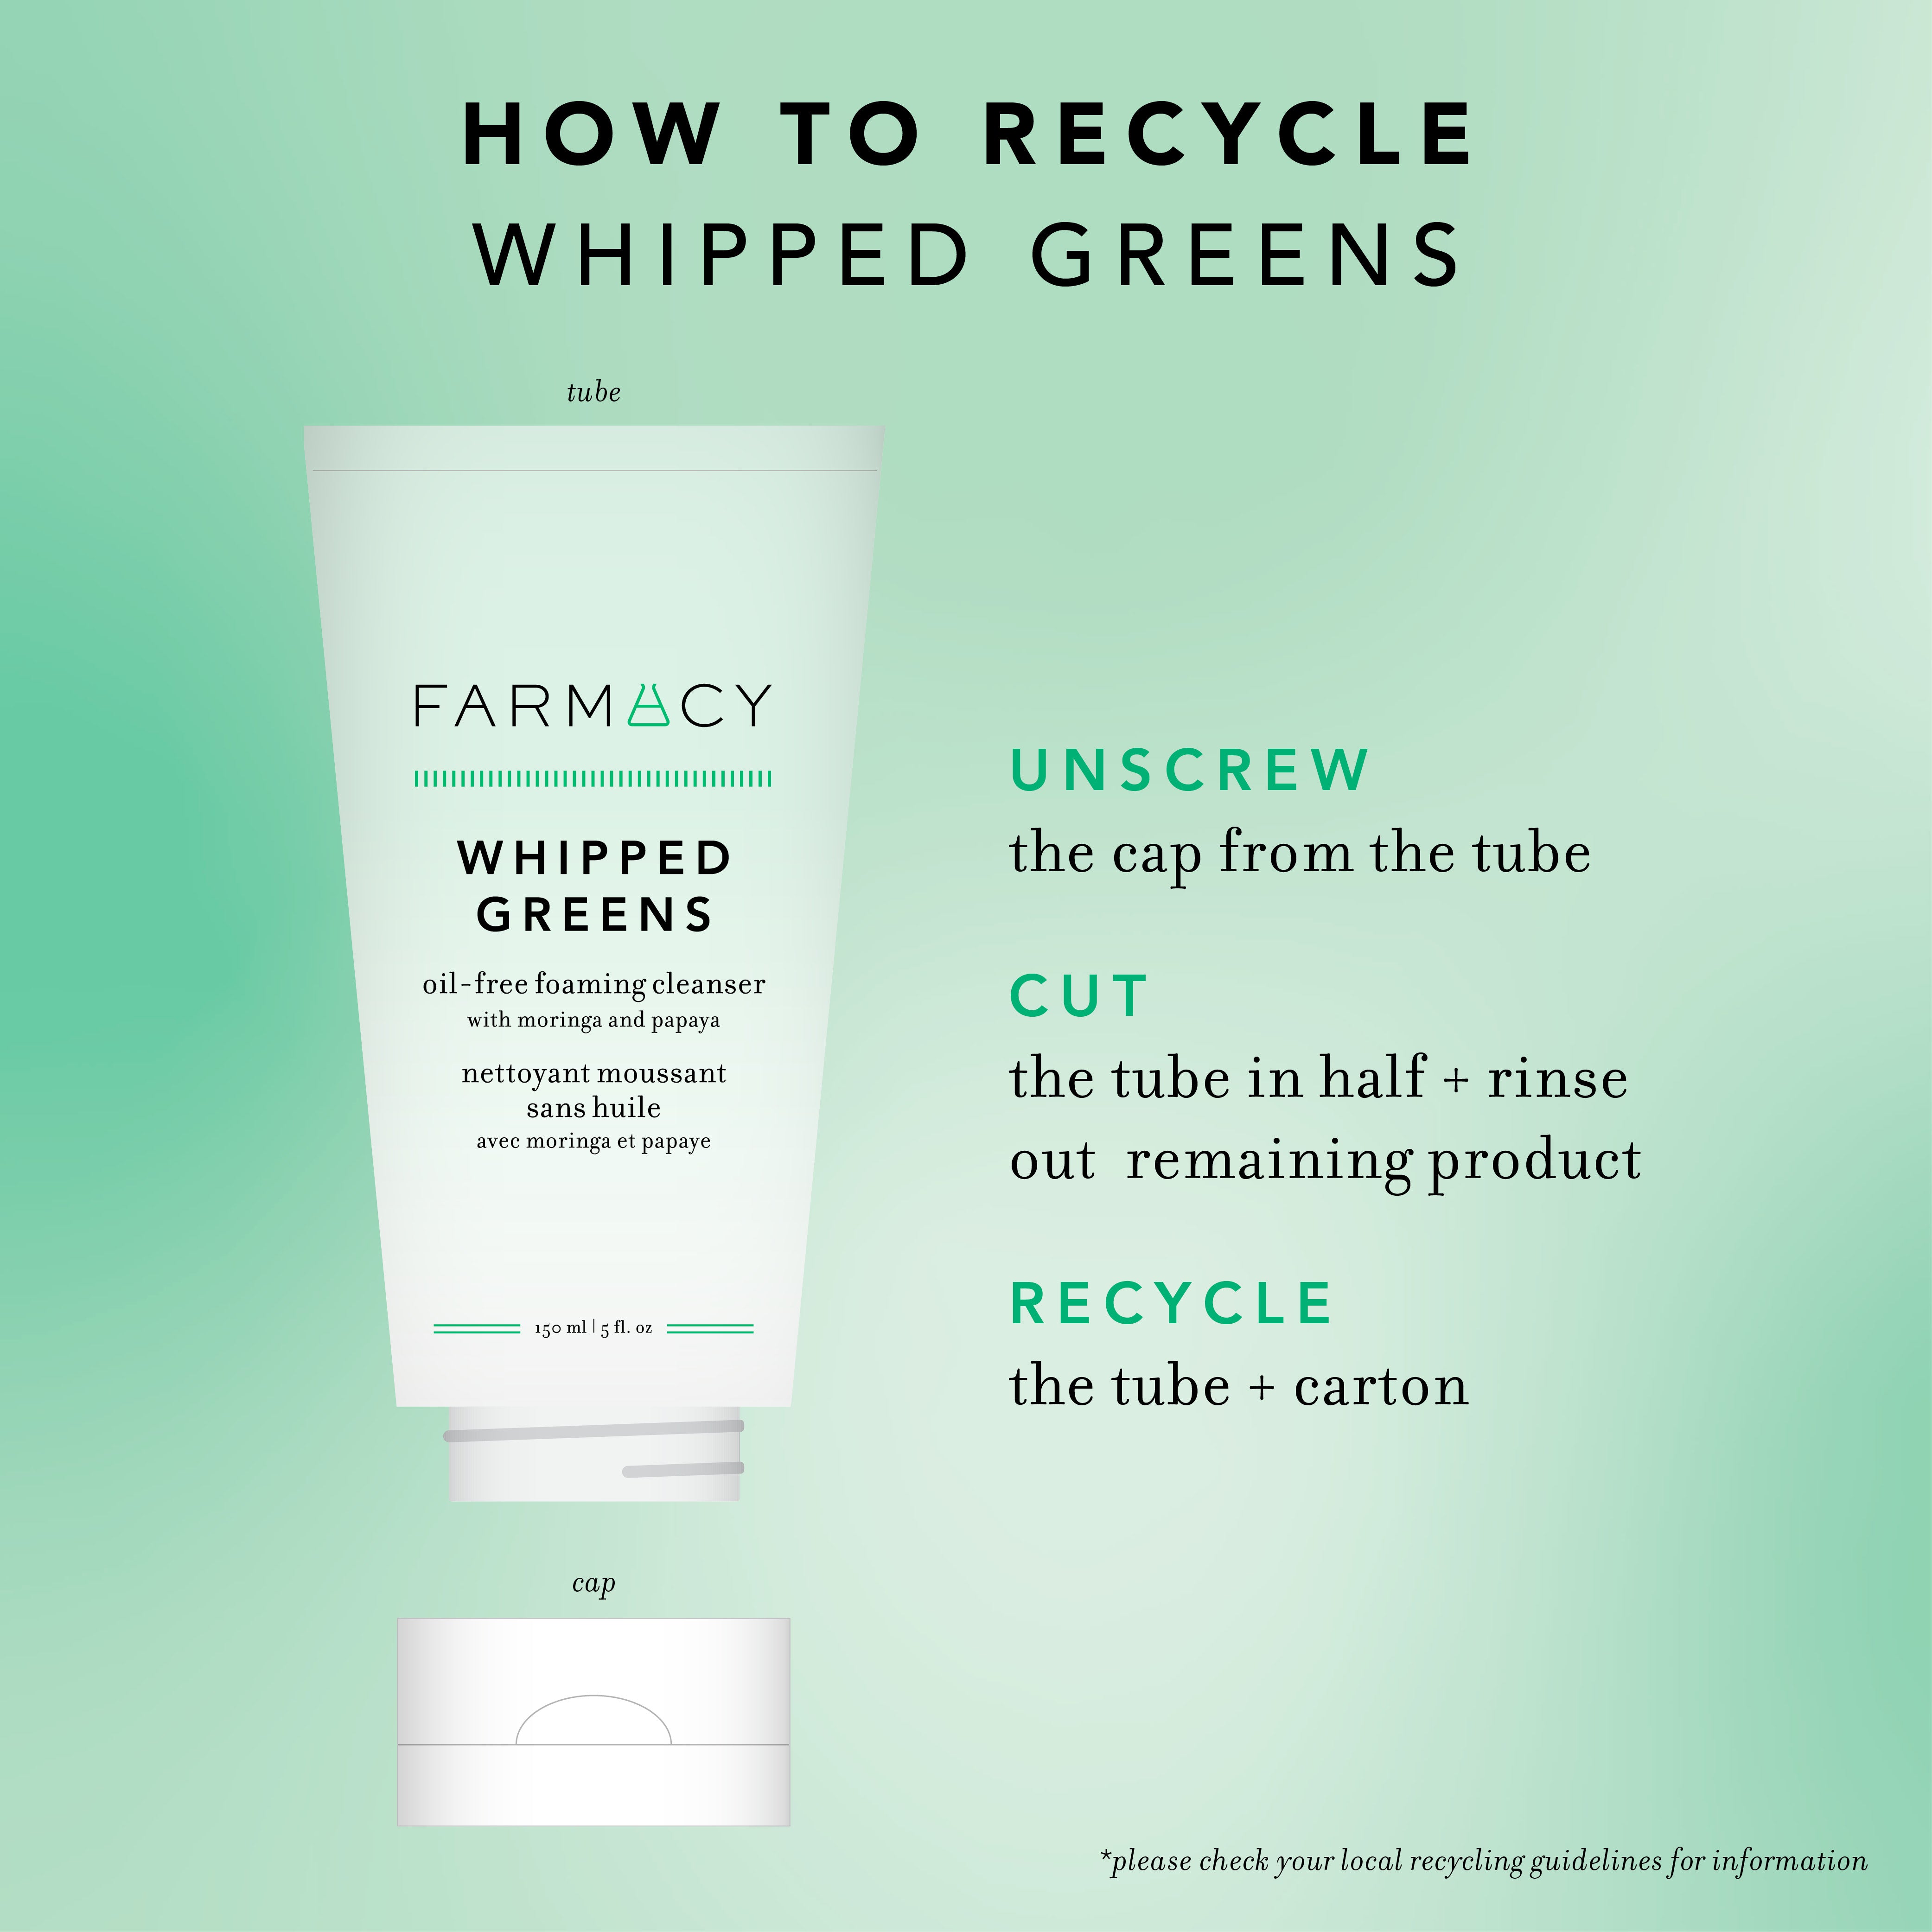 How to recycle Whipped Greens